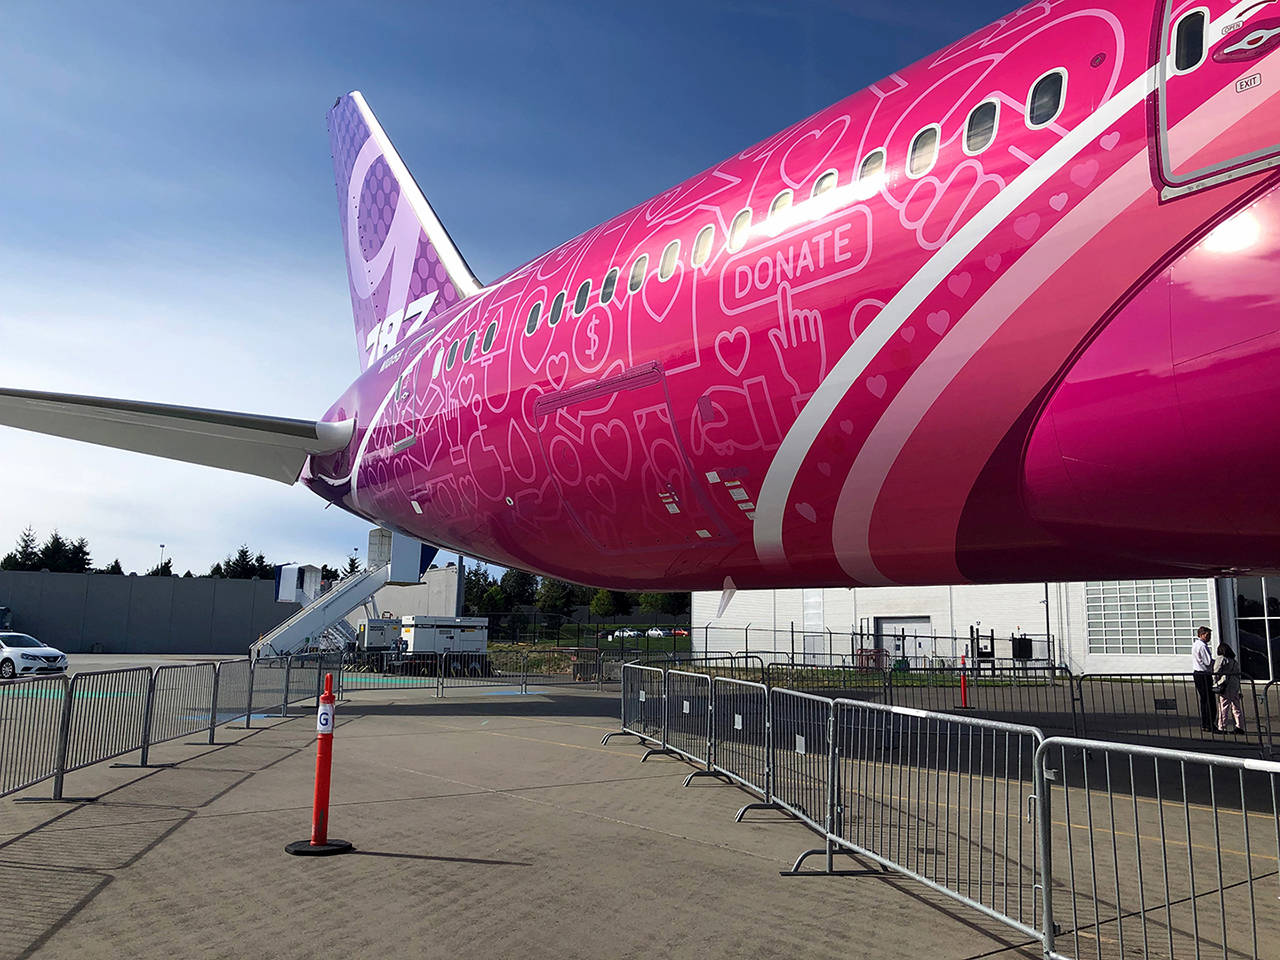 Boeing decorated a 787 Dreamliner to celebrate its Employees Community Fund. Signs and symbols of giving are displayed on a pink and purple decal that’s applied like wallpaper to the airplane. The decal is specifically designed to adhere to the 787 Dreamliner, nearly half of which is made of composite materials. (Janice Podsada / The Herald)